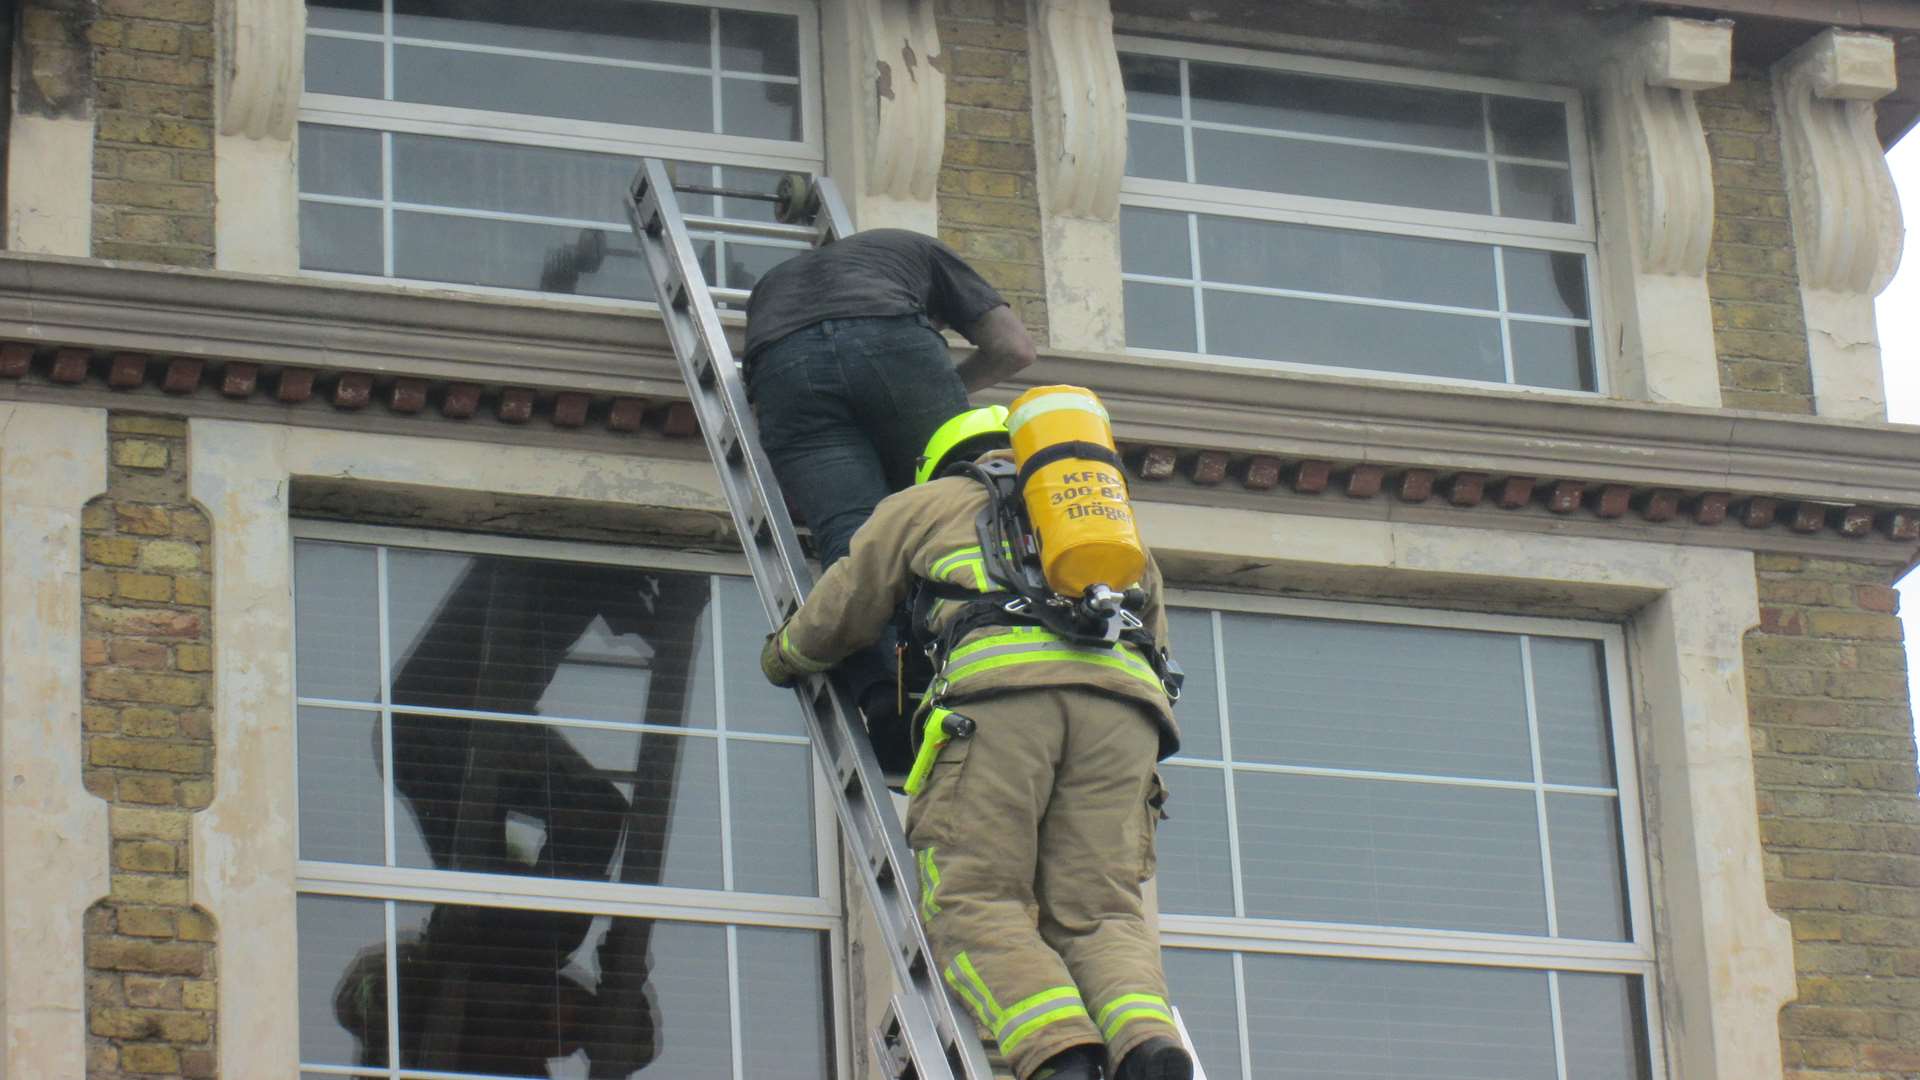 A man is brought down by ladder from the top floor of the blazing building